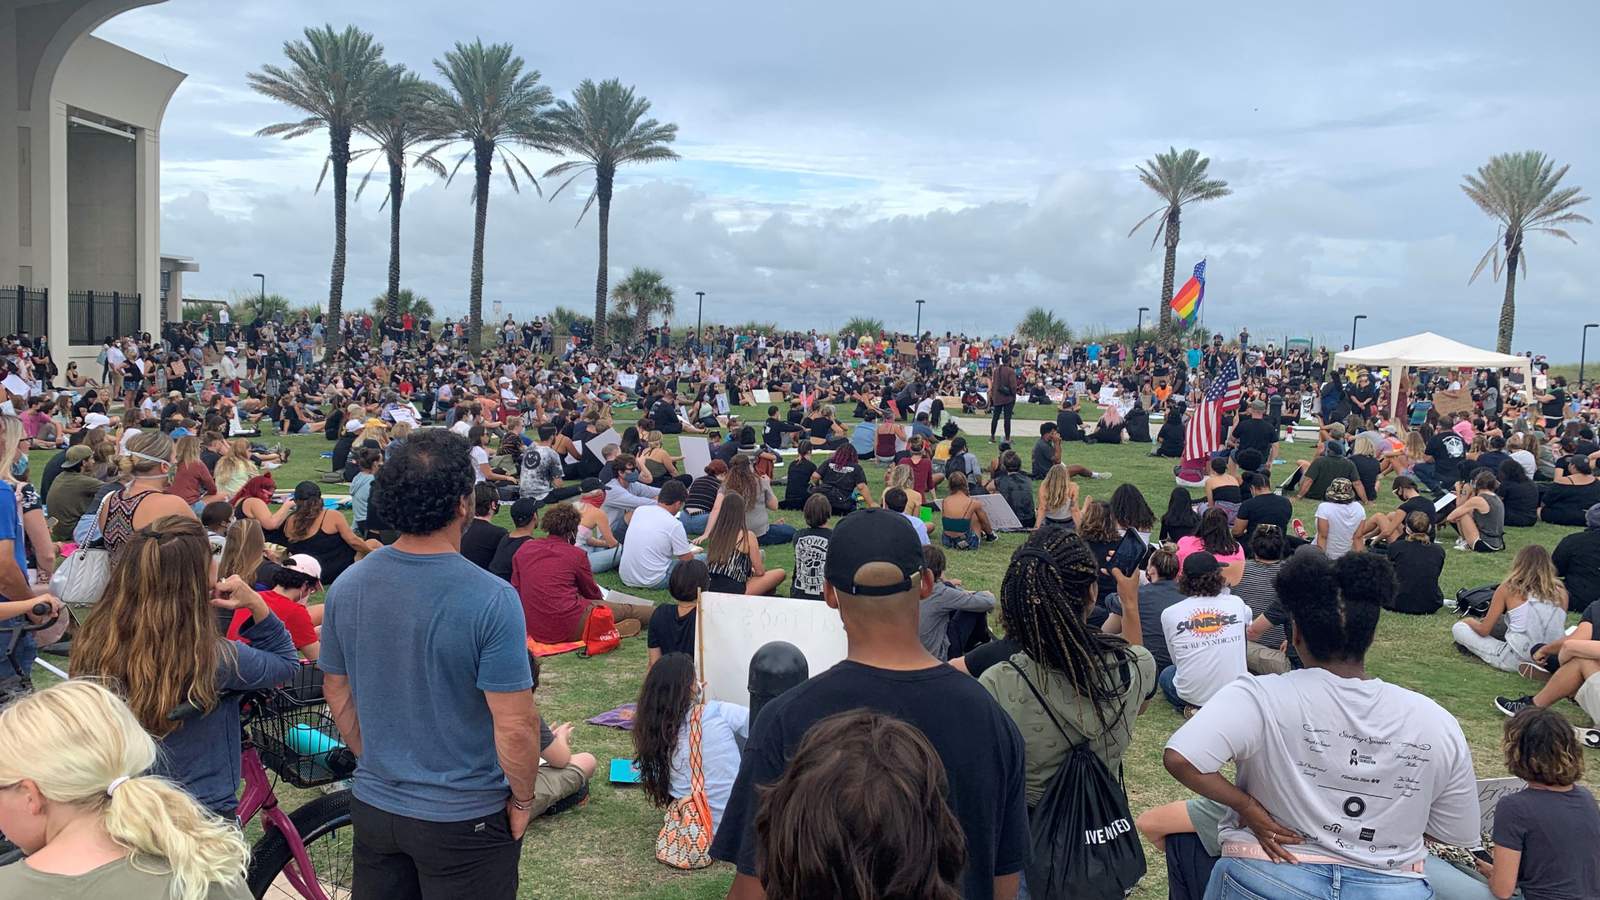 Demonstrators come together in Jacksonville Beach for a display of unity